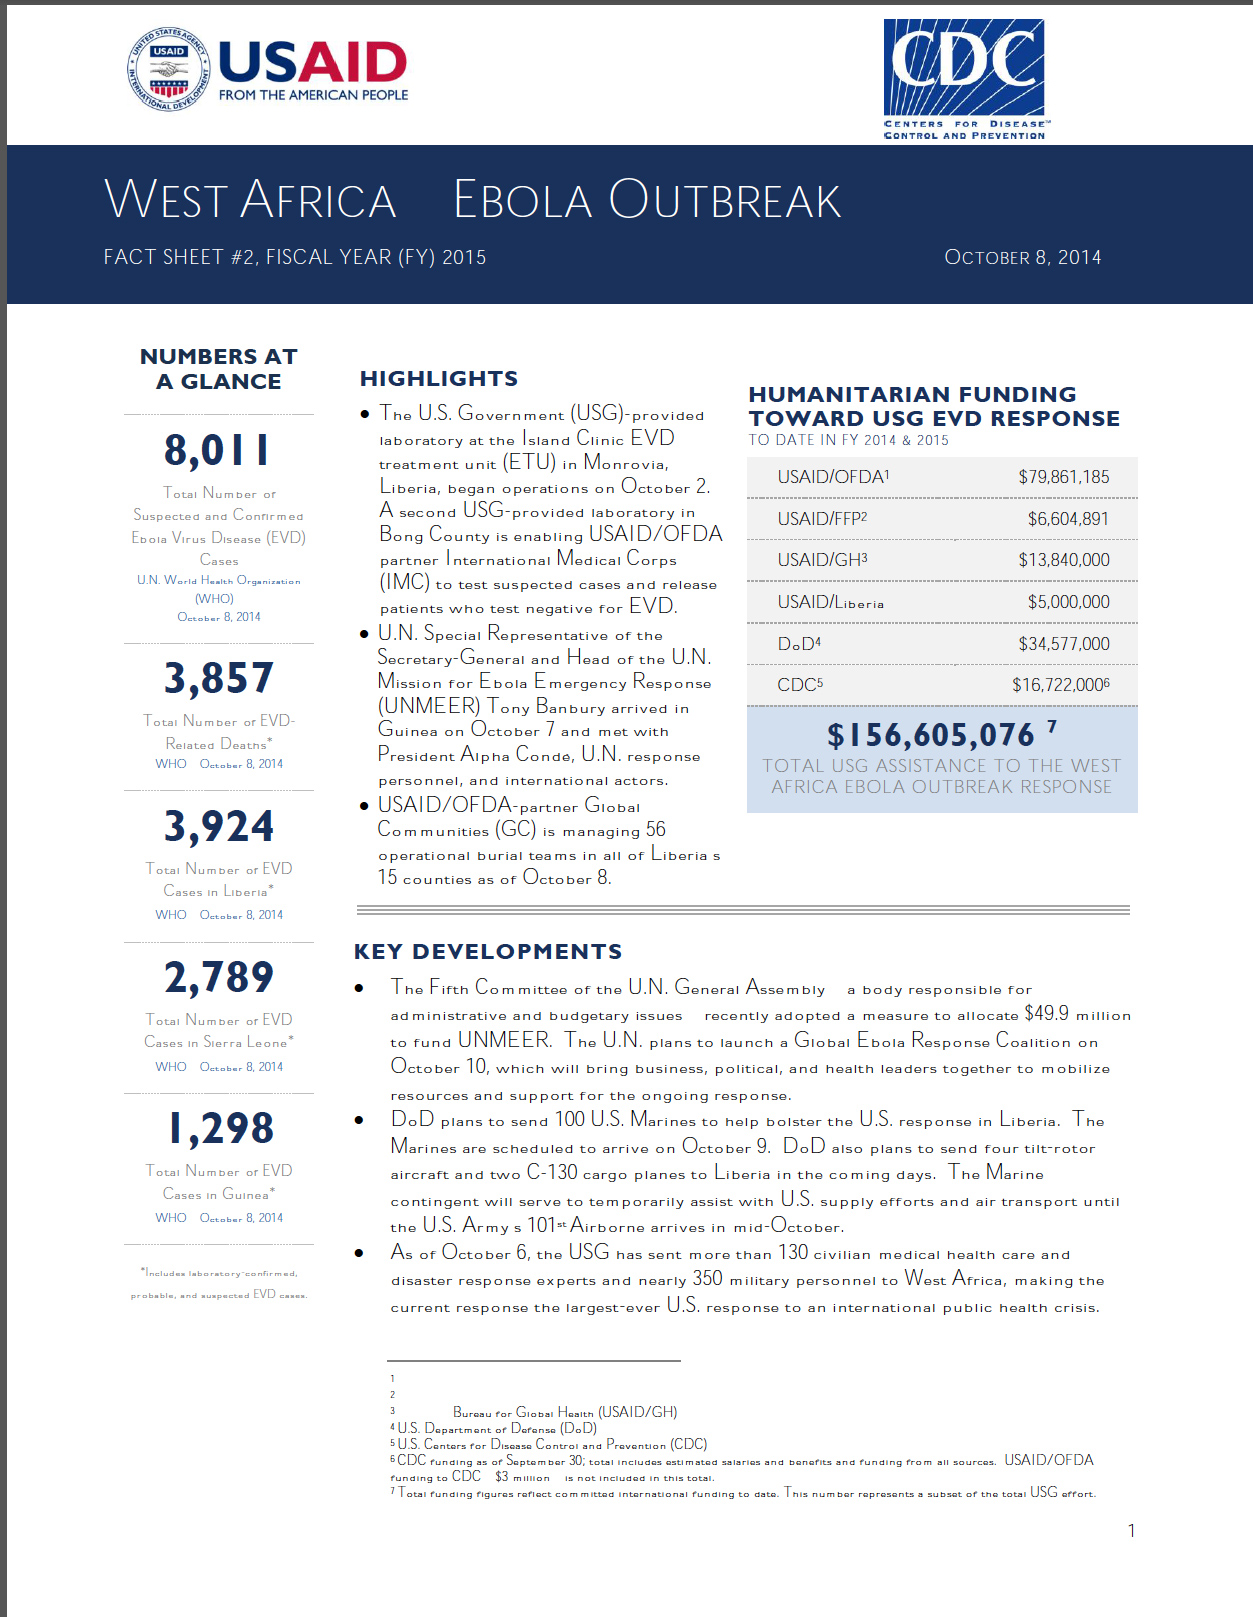 West Africa - Ebola Outbreak - Fact Sheet #2 (FY 15)